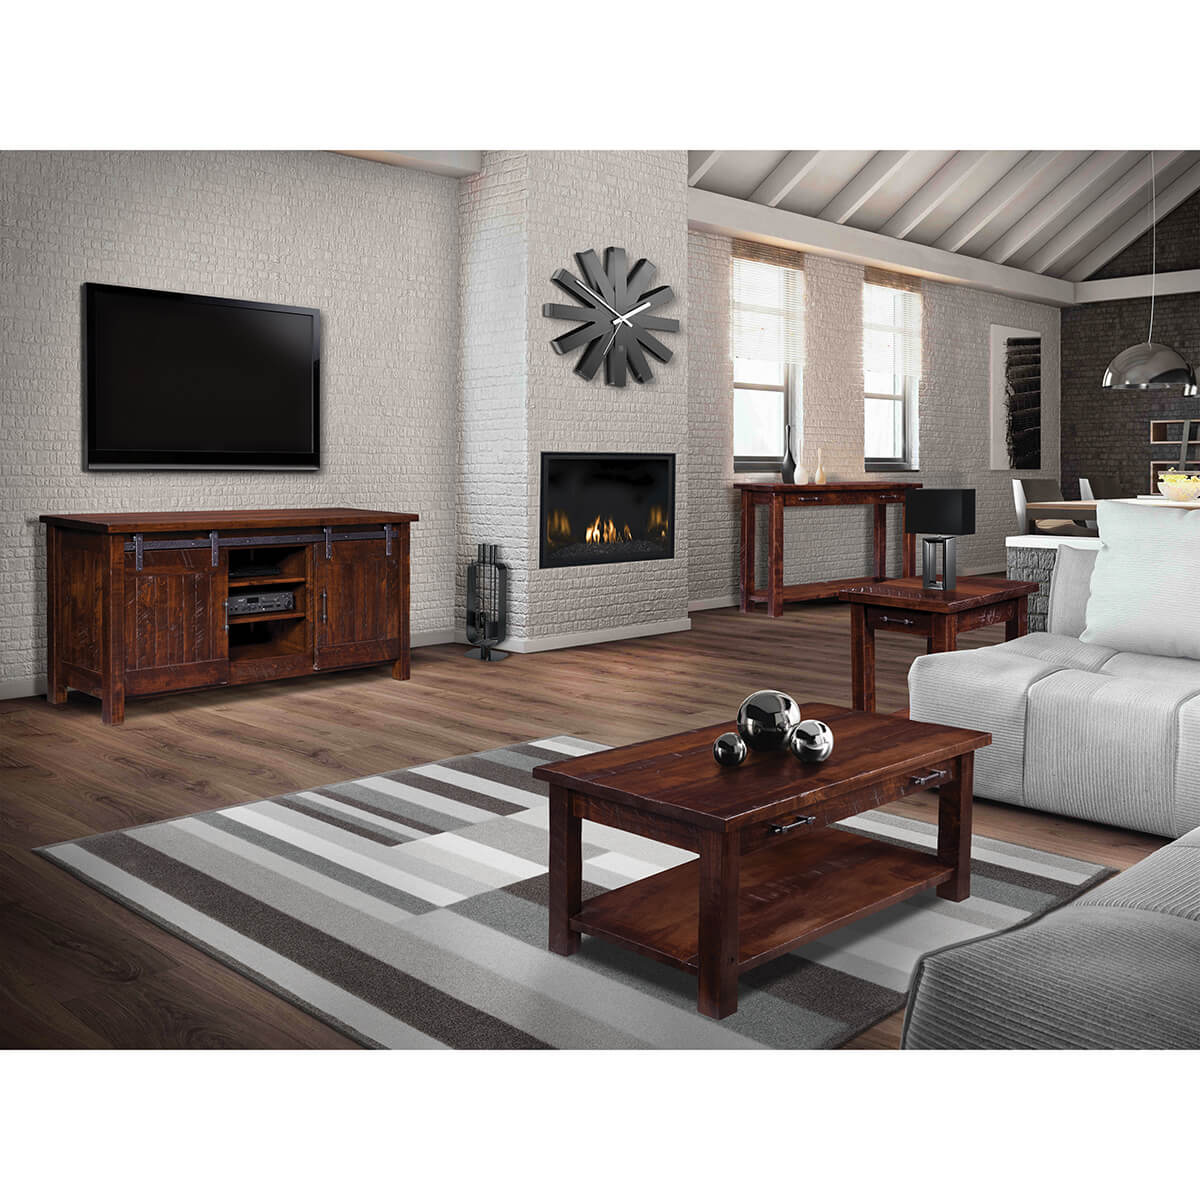 HoustonLivingRoomCollection60233